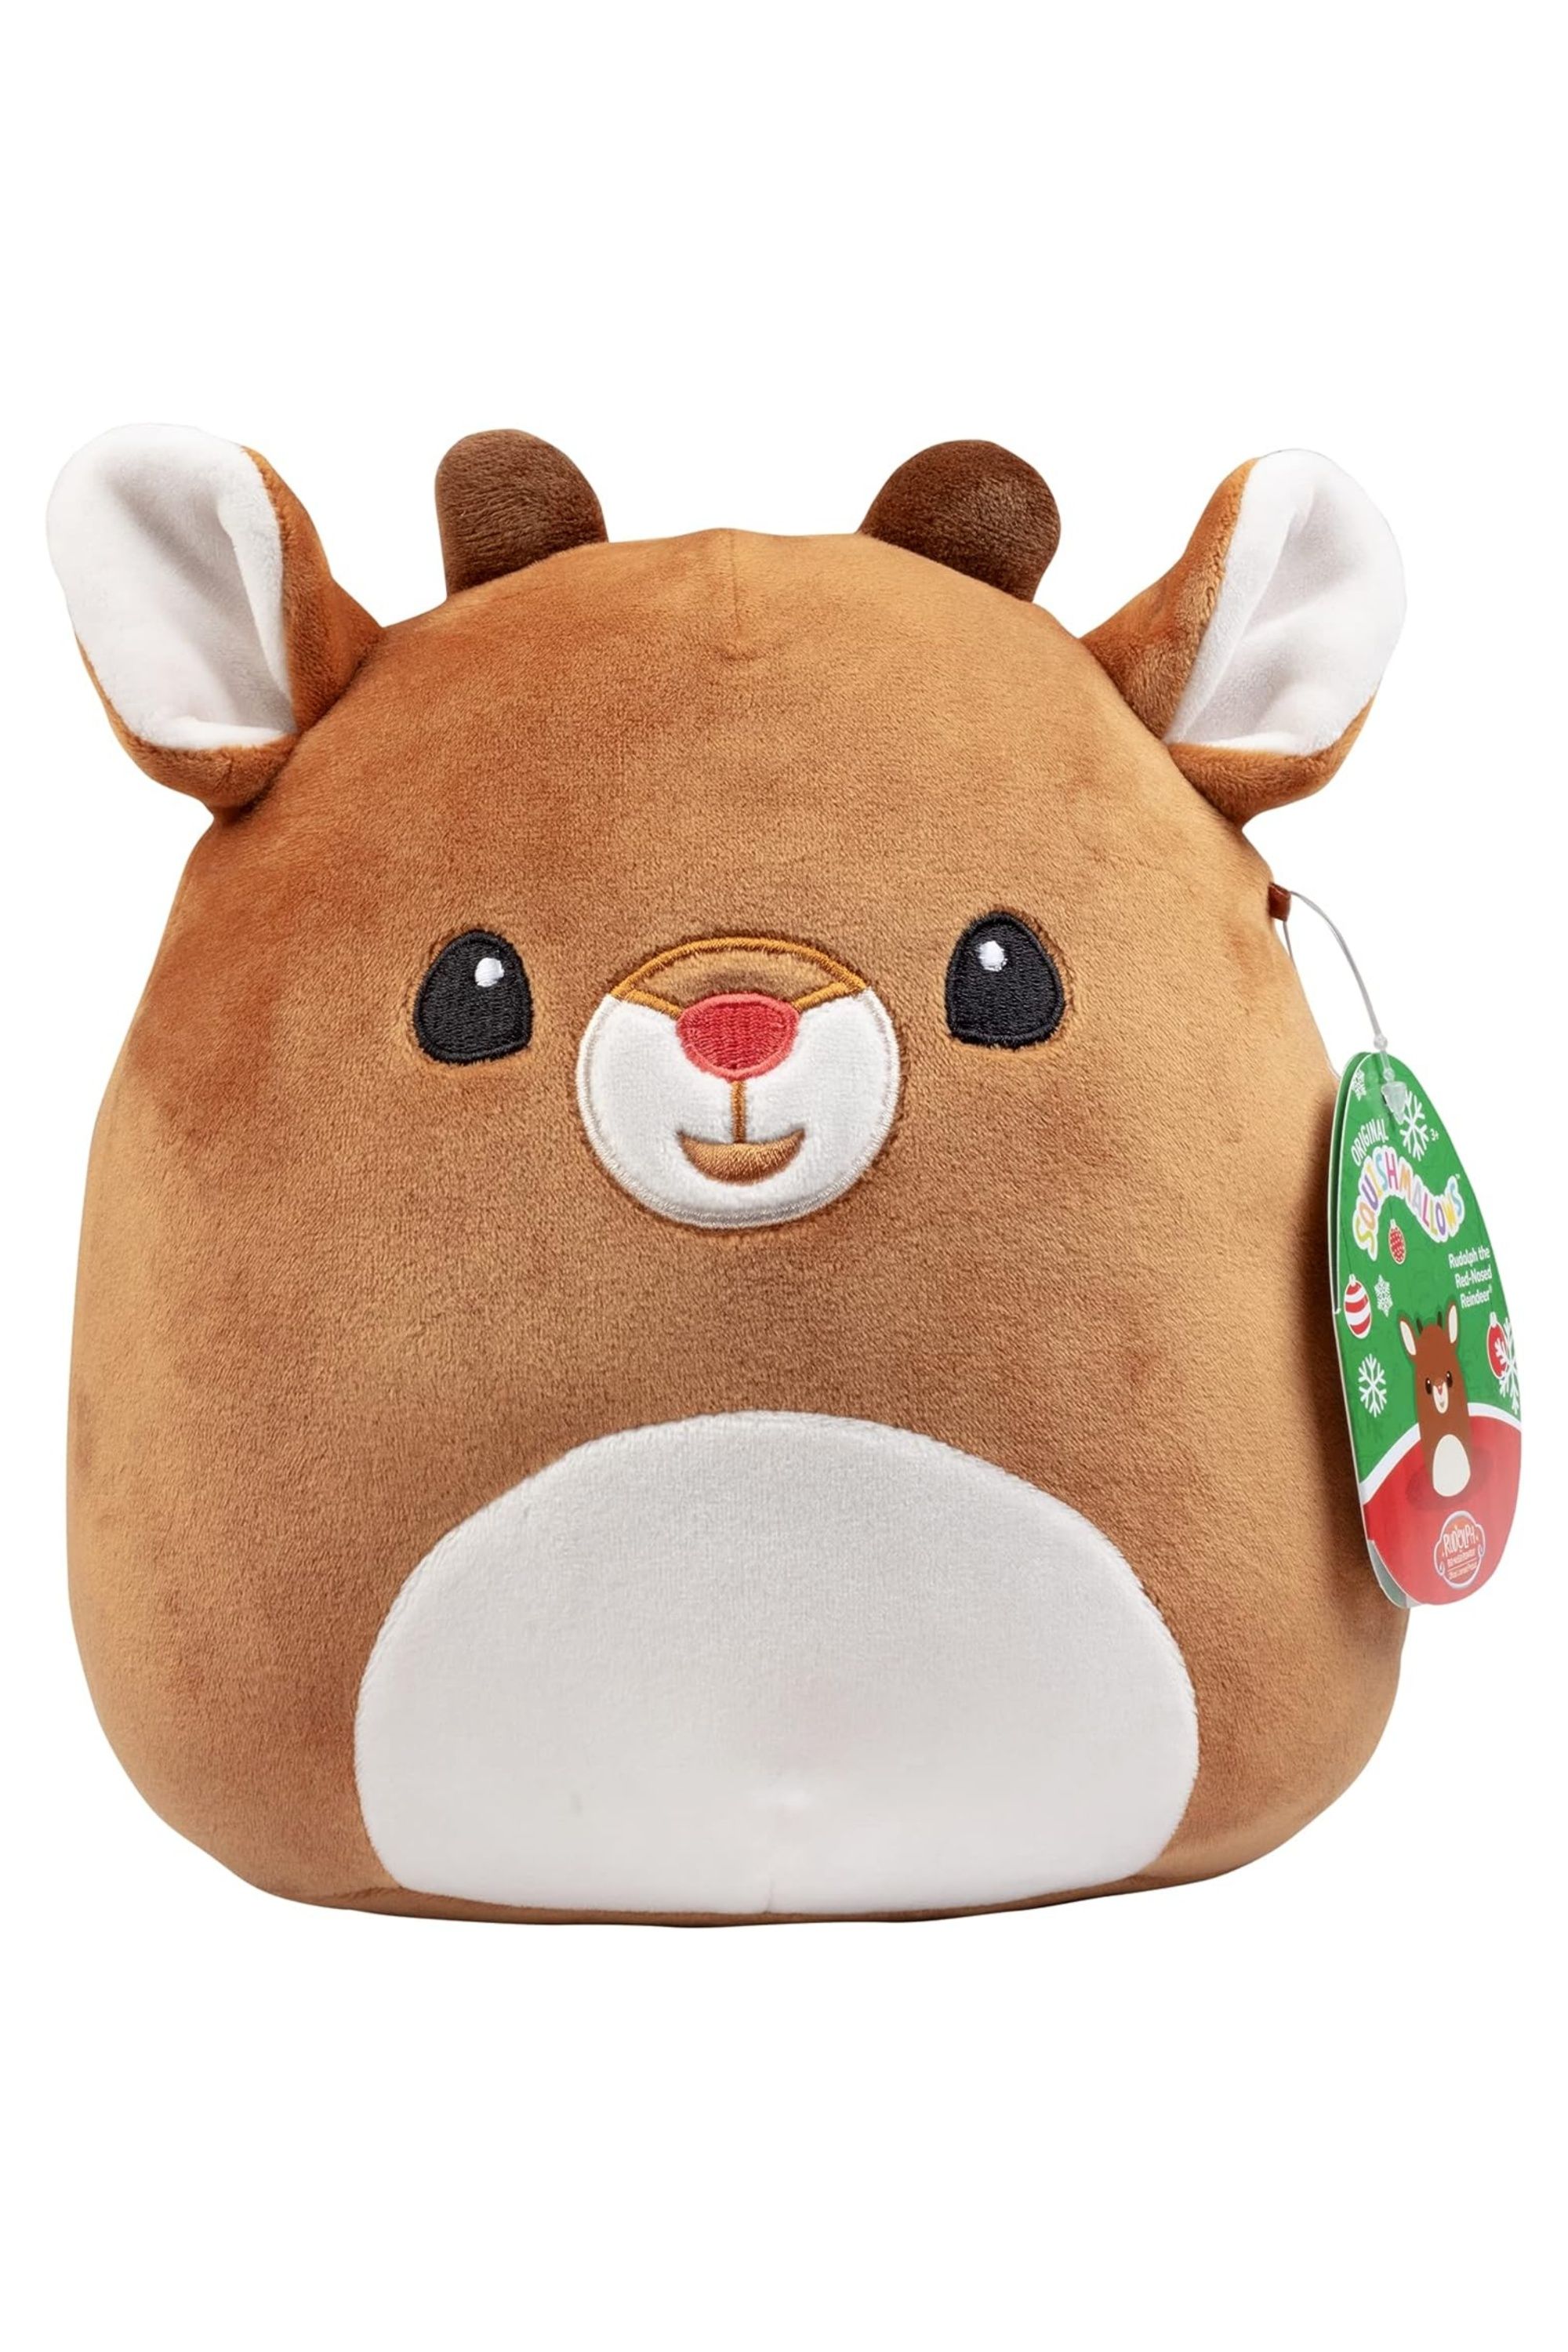 Rudolph The Red-Nosed Reindeer Squishmallow